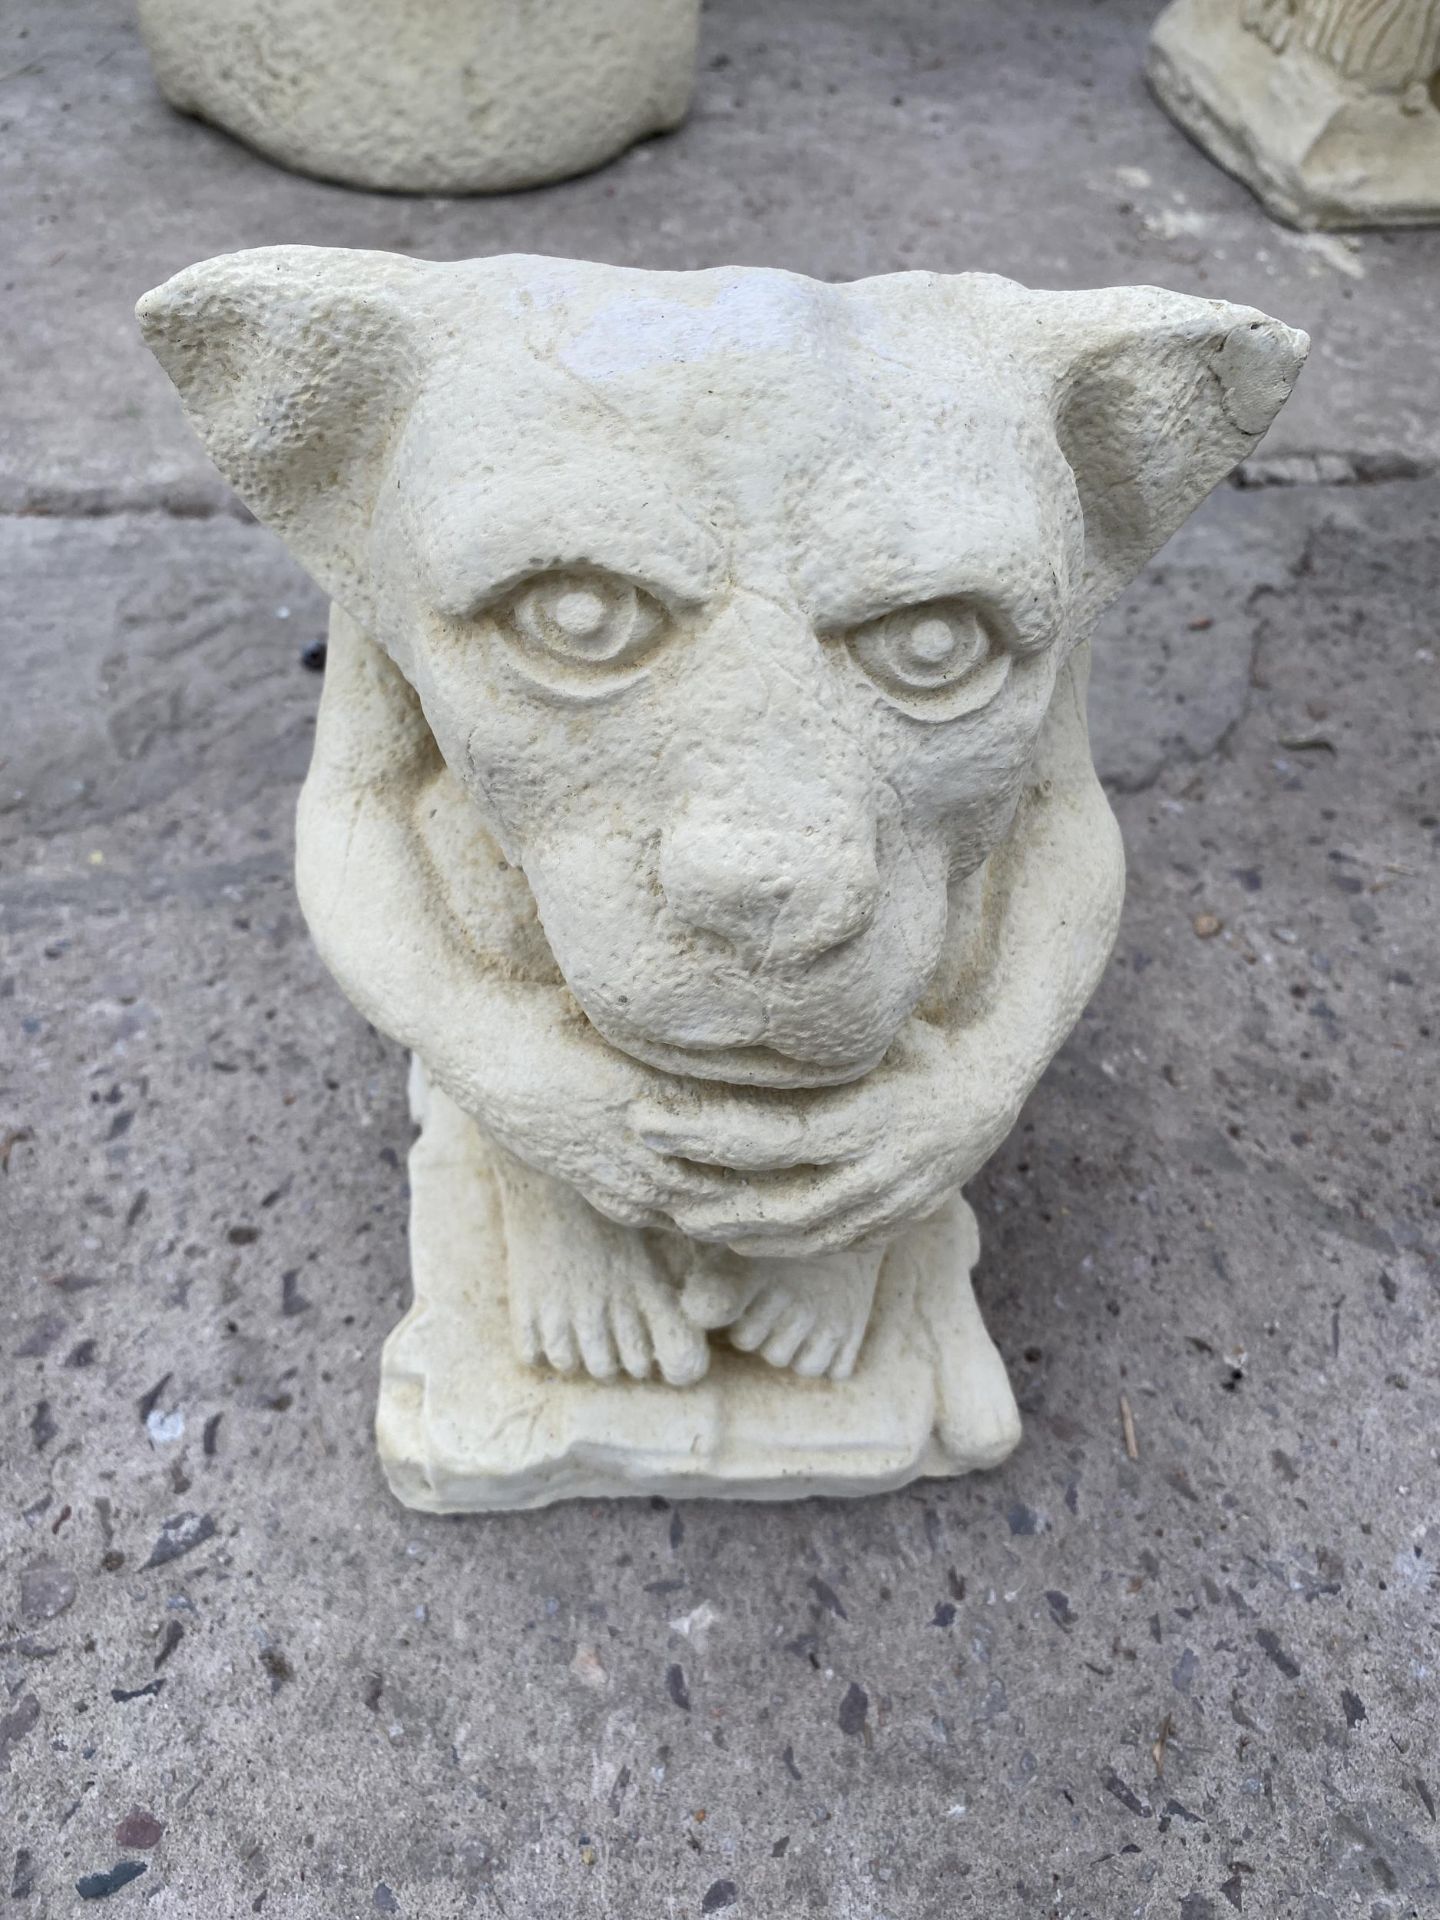 AN AS NEW EX DISPLAY CONCRETE SMALL GARGOYLE FIGURE *PLEASE NOTE VAT TO BE PAID ON THIS ITEM*